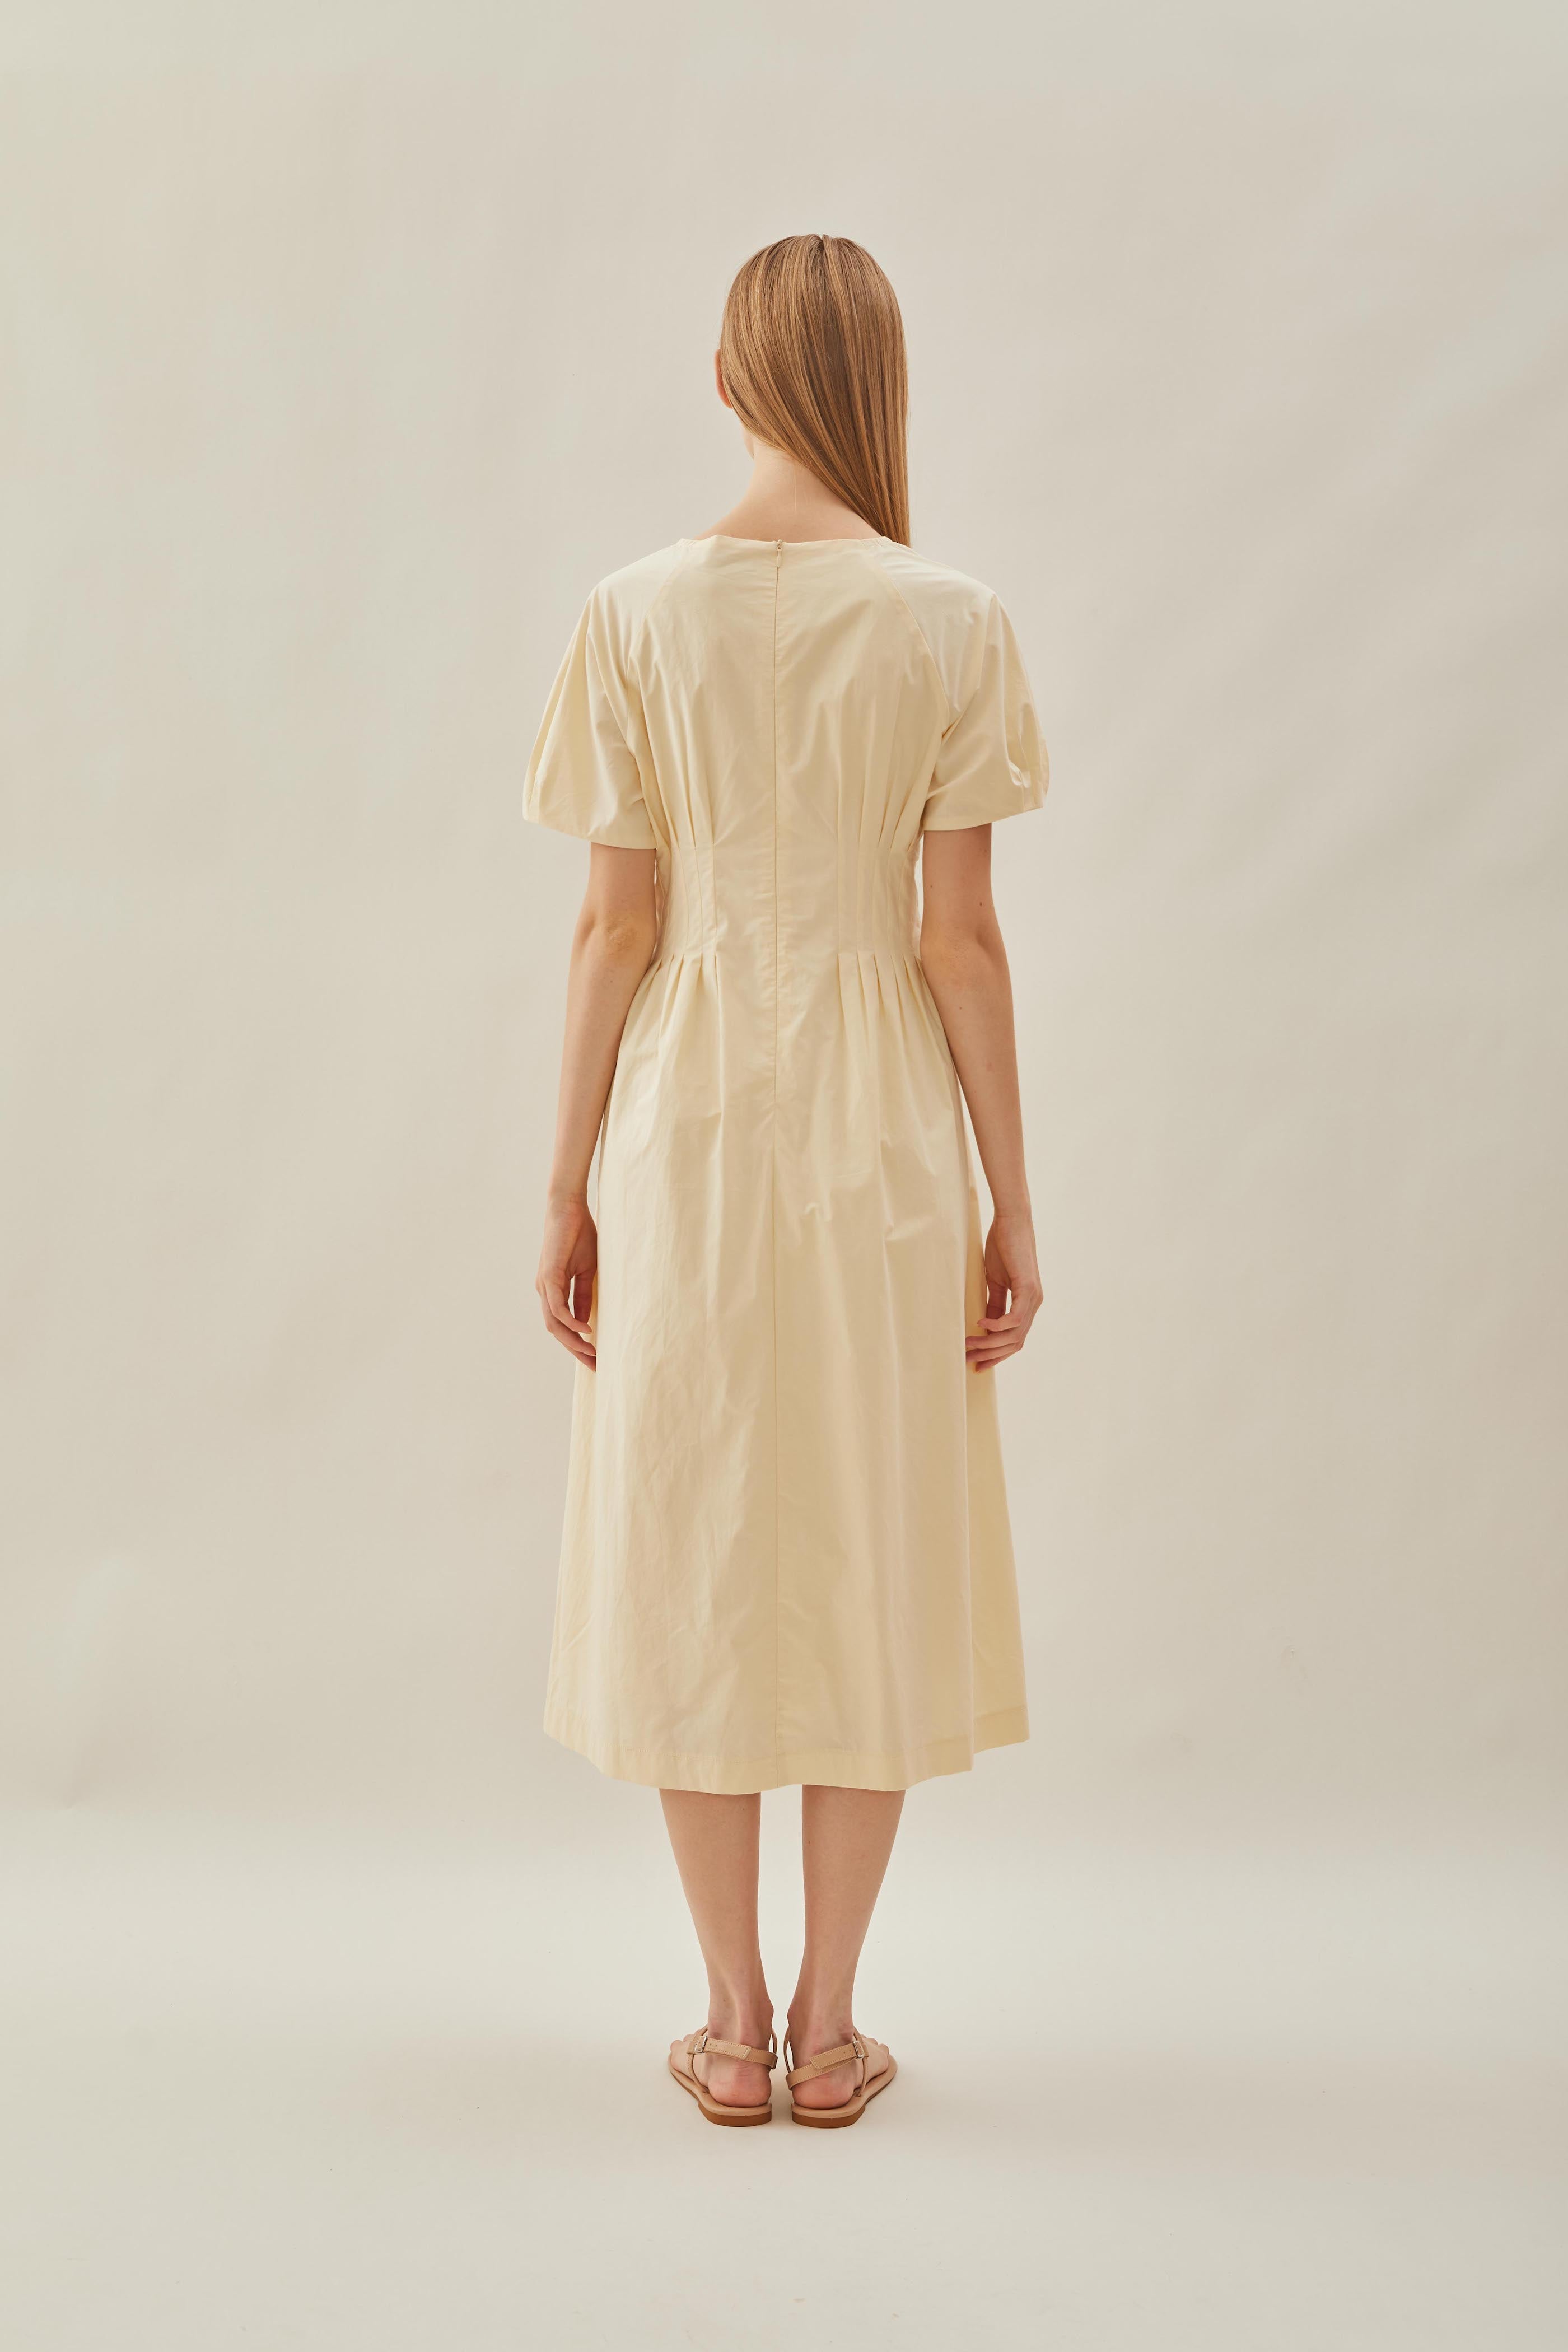 Pleated Waist Dress in Soft Yellow